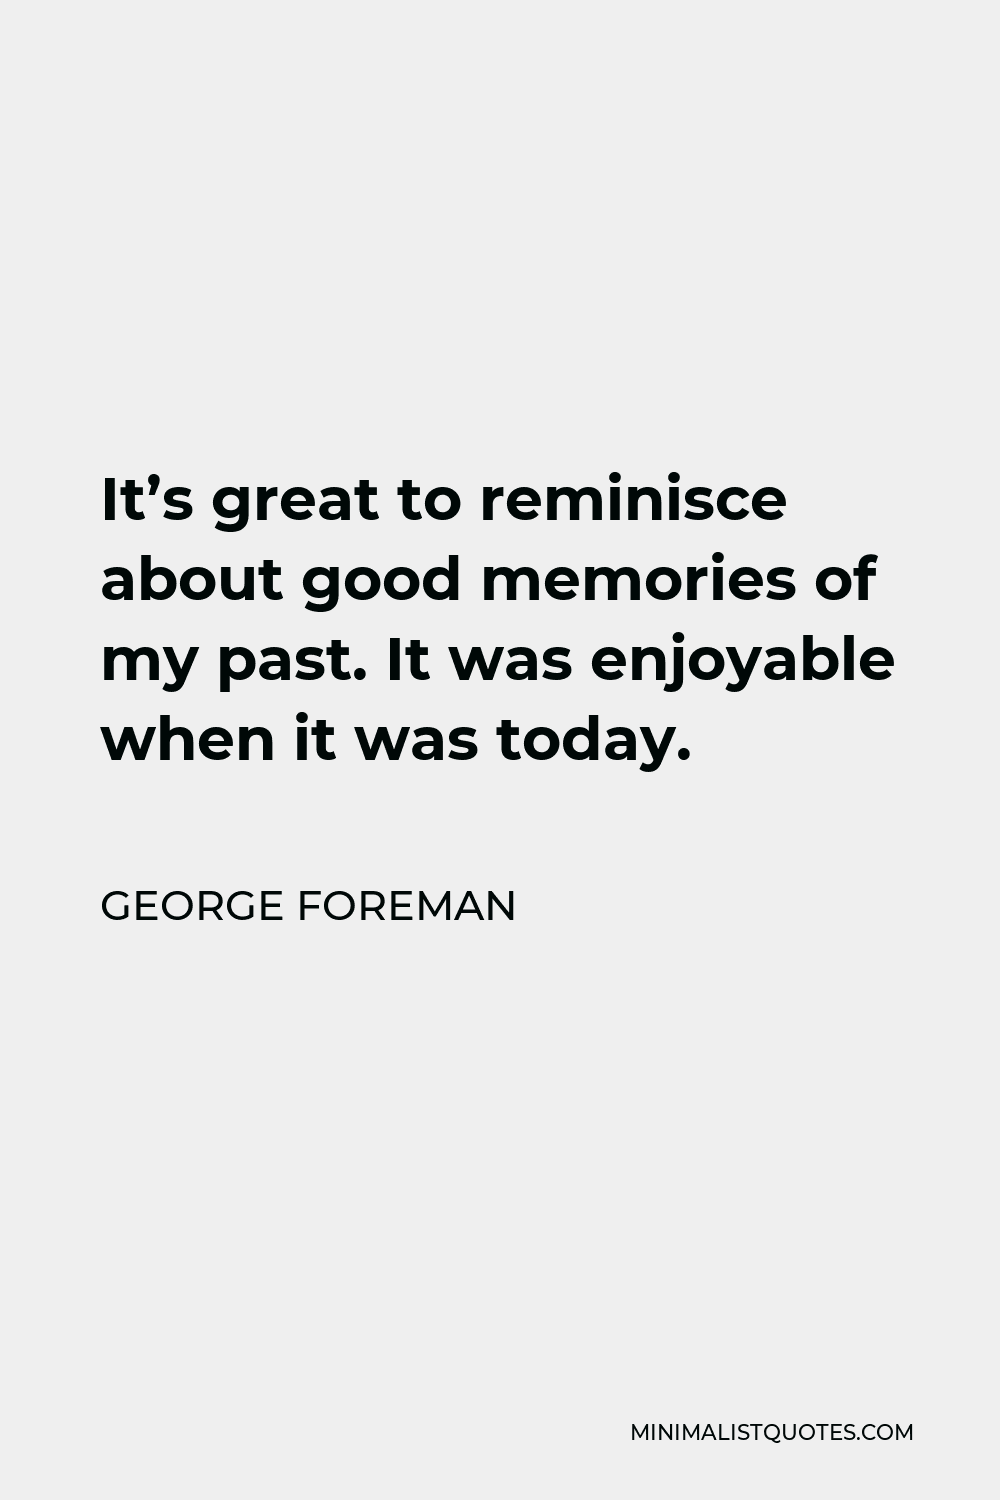 George Foreman Quote - It’s great to reminisce about good memories of my past. It was enjoyable when it was today.